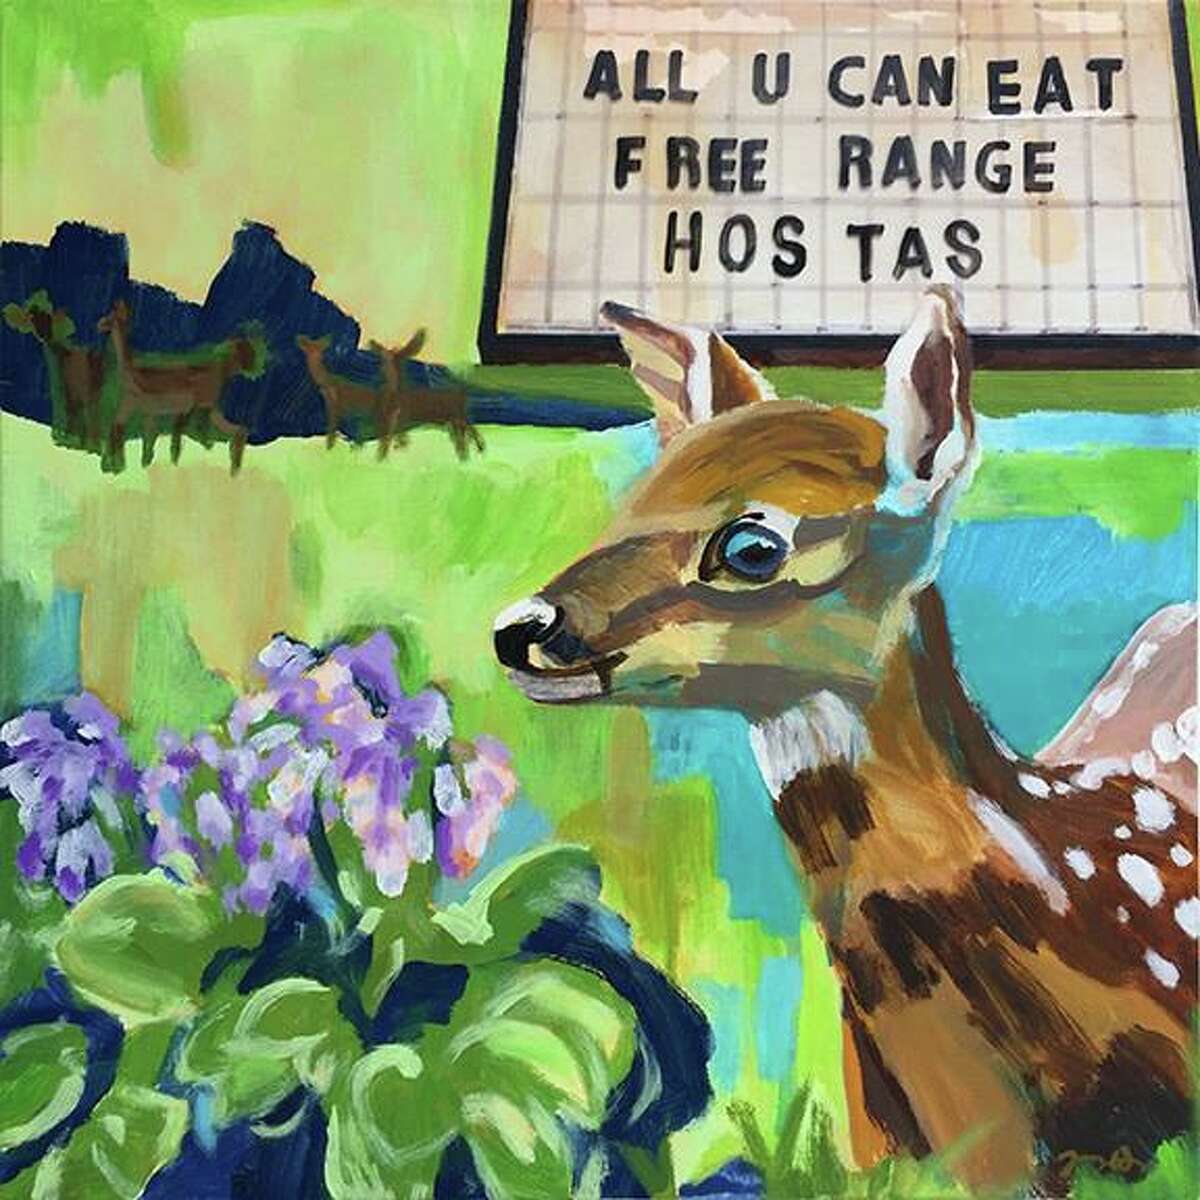 This painting by Tammy Winser, a Westport artist, is called “Deer” and pokes fun at suburban pests. She is a founder of the Westport Artists Collective, a group of artists that meet and show their work at the Westport Arts Center.